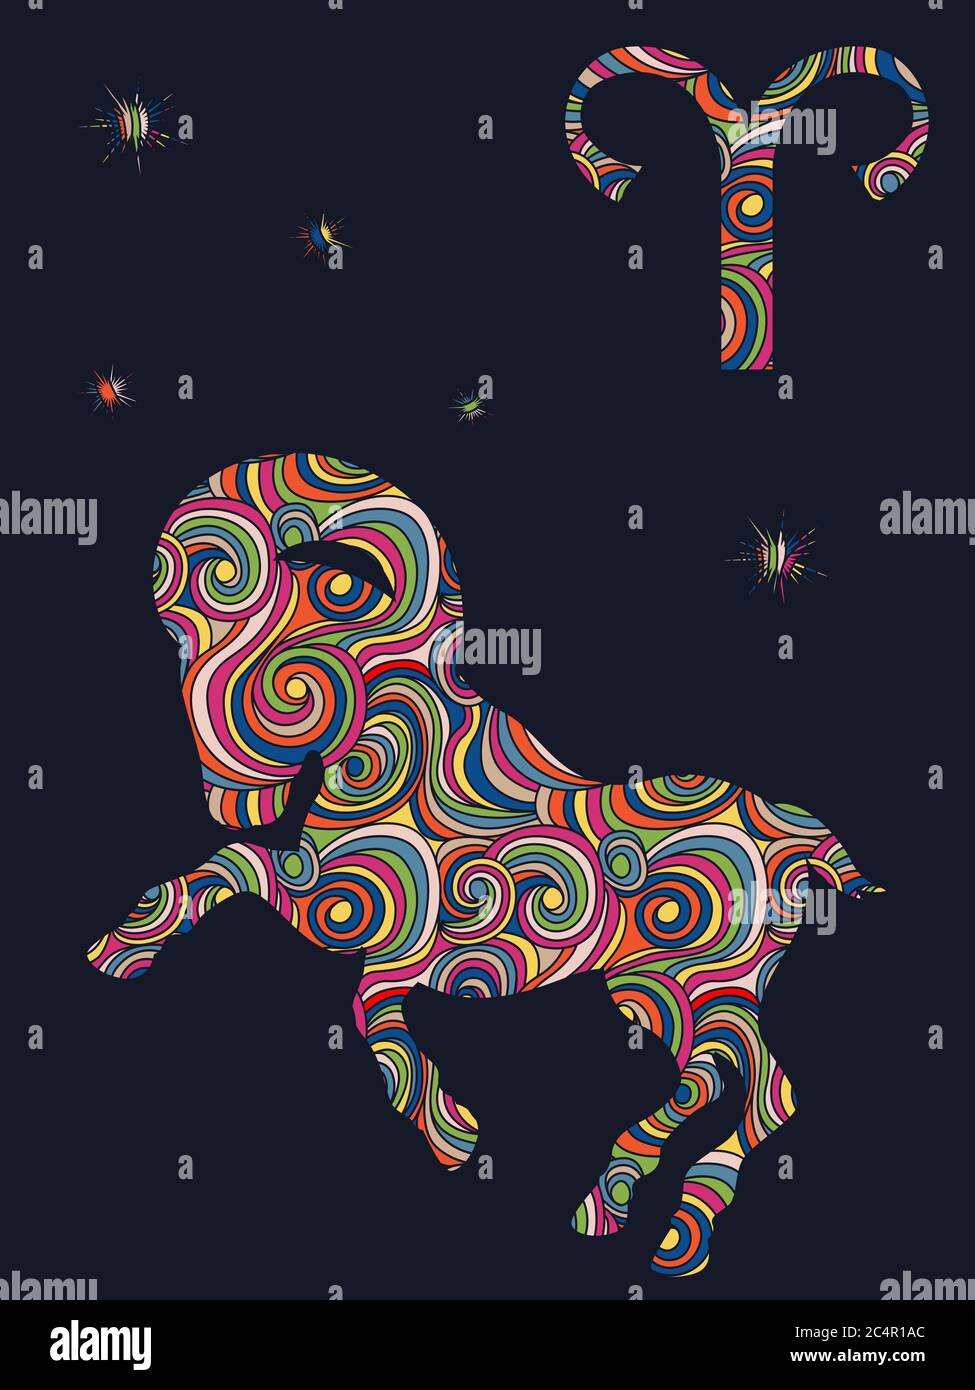 Zodiac sign Aries fill with colorful muted wavy shapes on the dark gray background with stars and astrological symbols, vector illustration Stock Vector